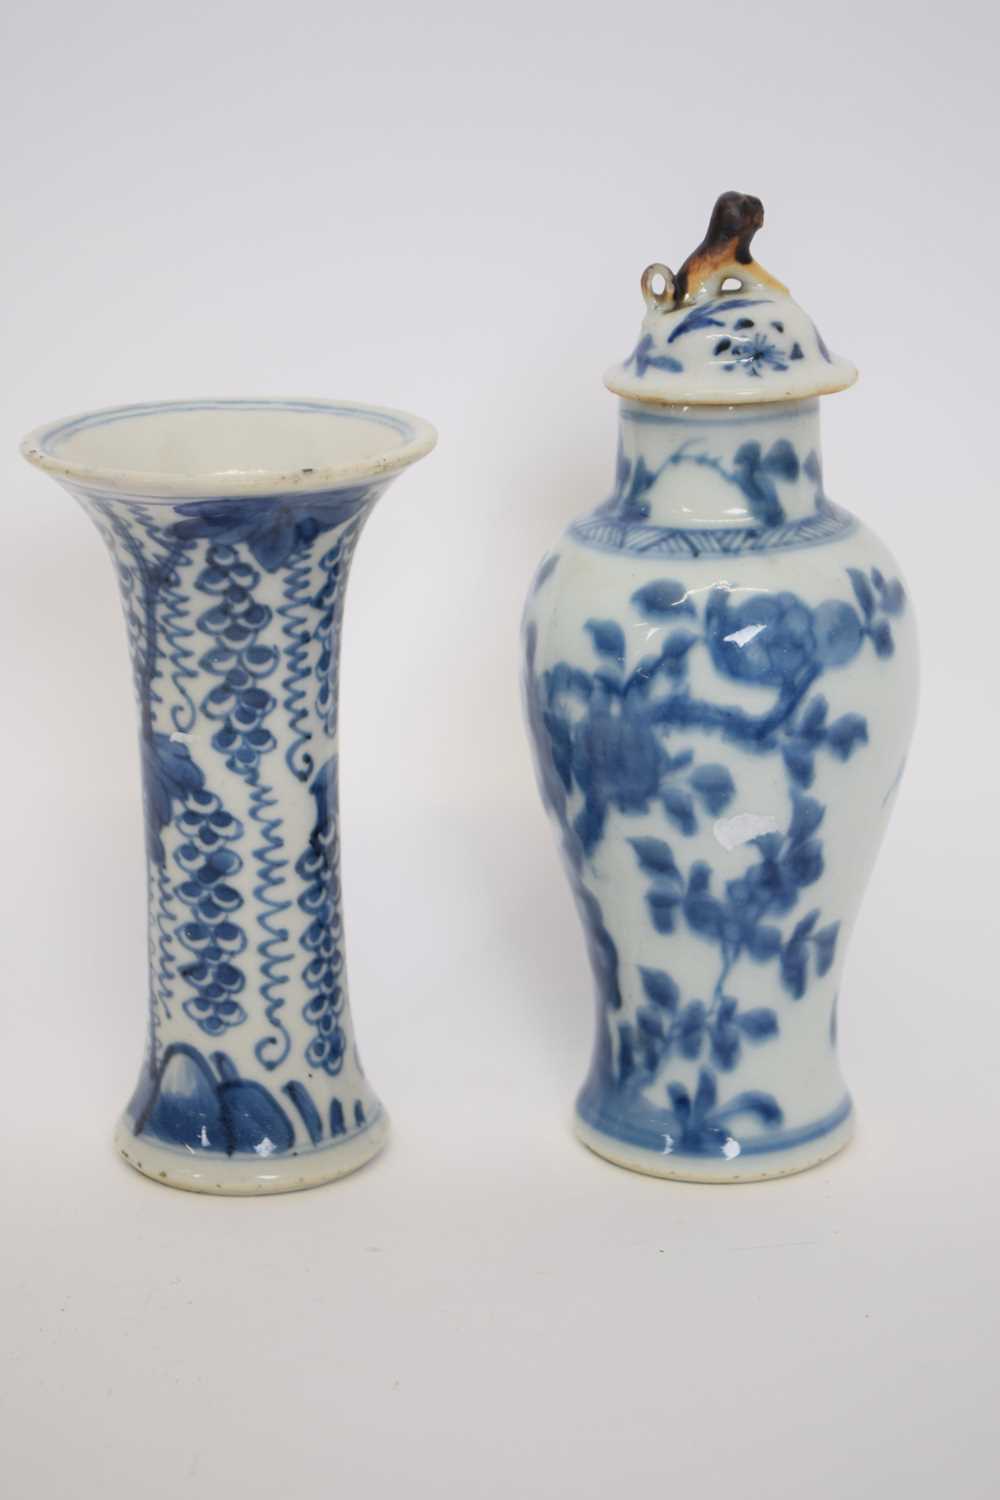 Two 18th century Chinese Vases